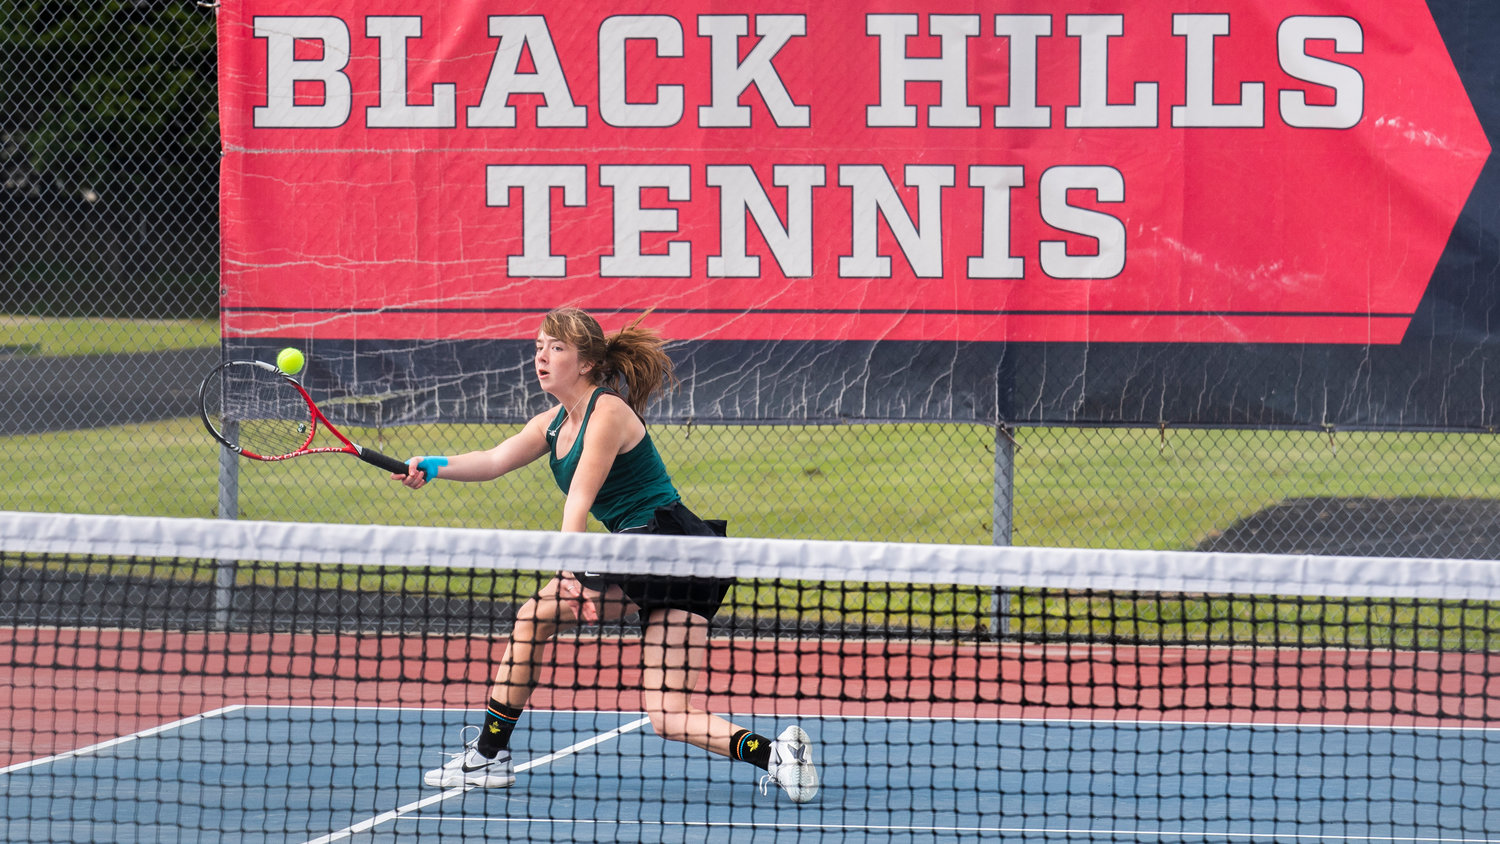 Centralia’s Liza Hopkins stretches out in an attempt to return a shot during a doubles match at A.G. West Black Hills High School Tuesday afternoon in Tumwater.